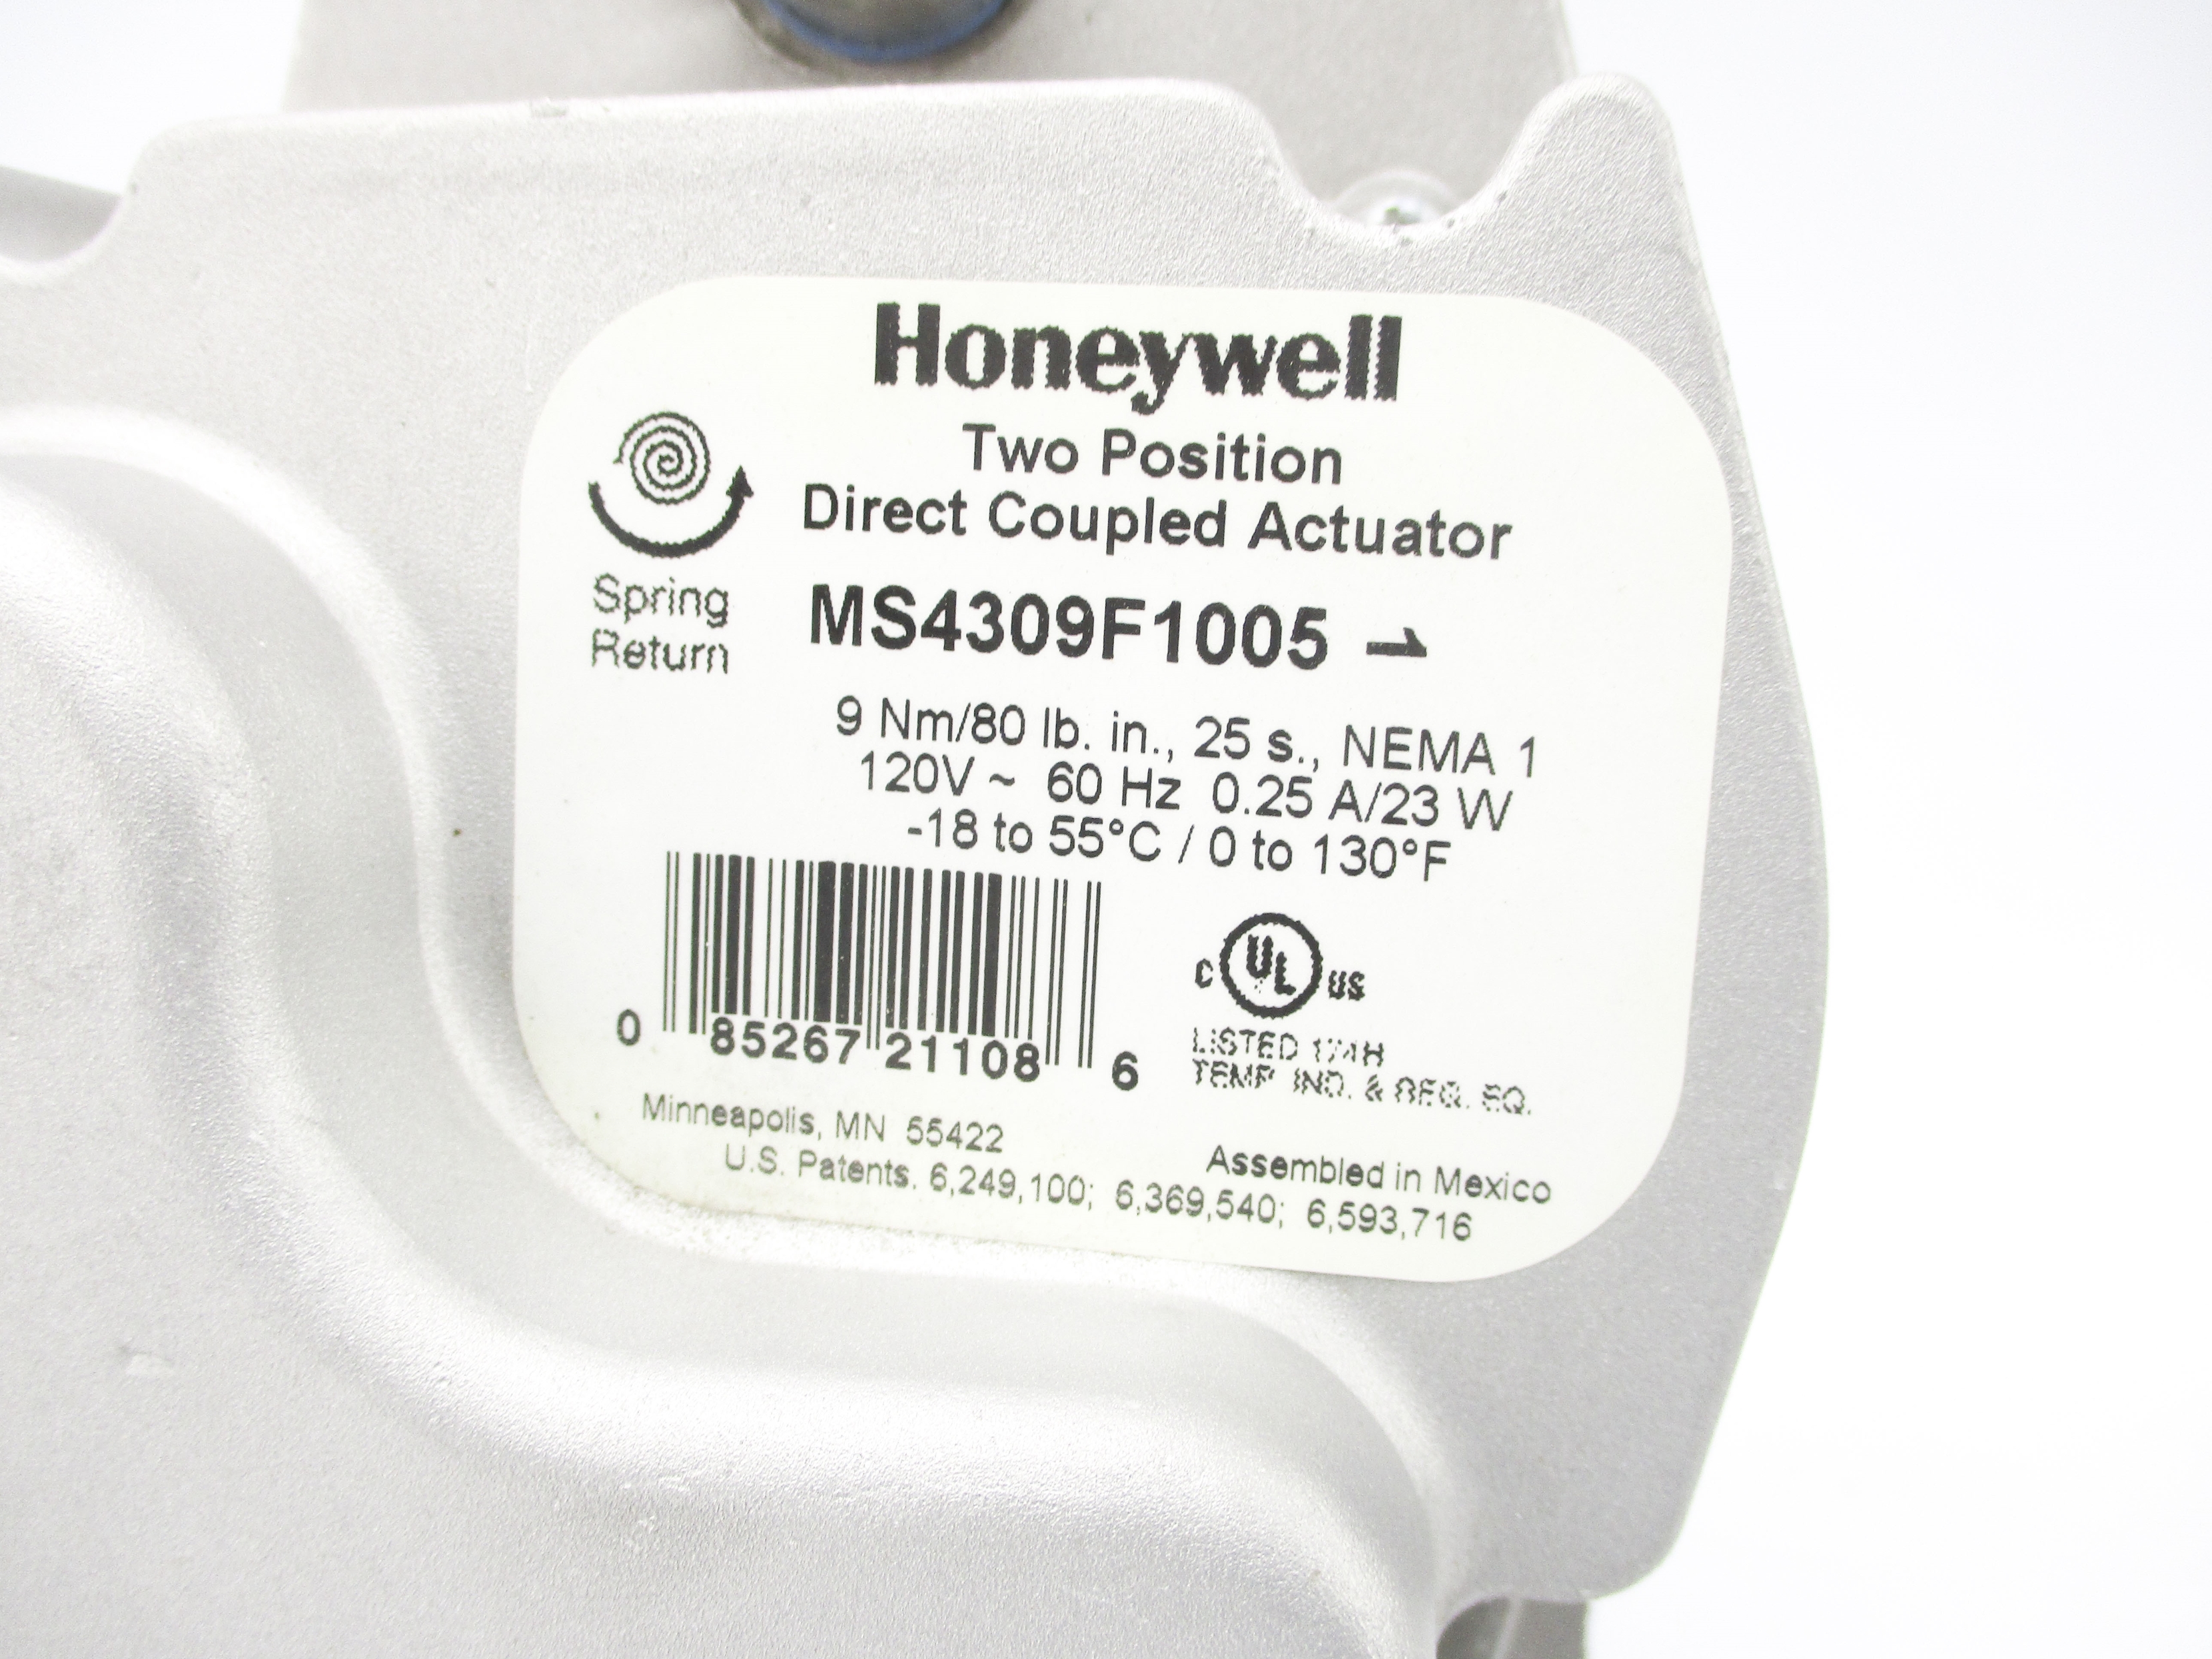 Honeywell MS4309F1005 Two Position Direct Coupled Actuator 